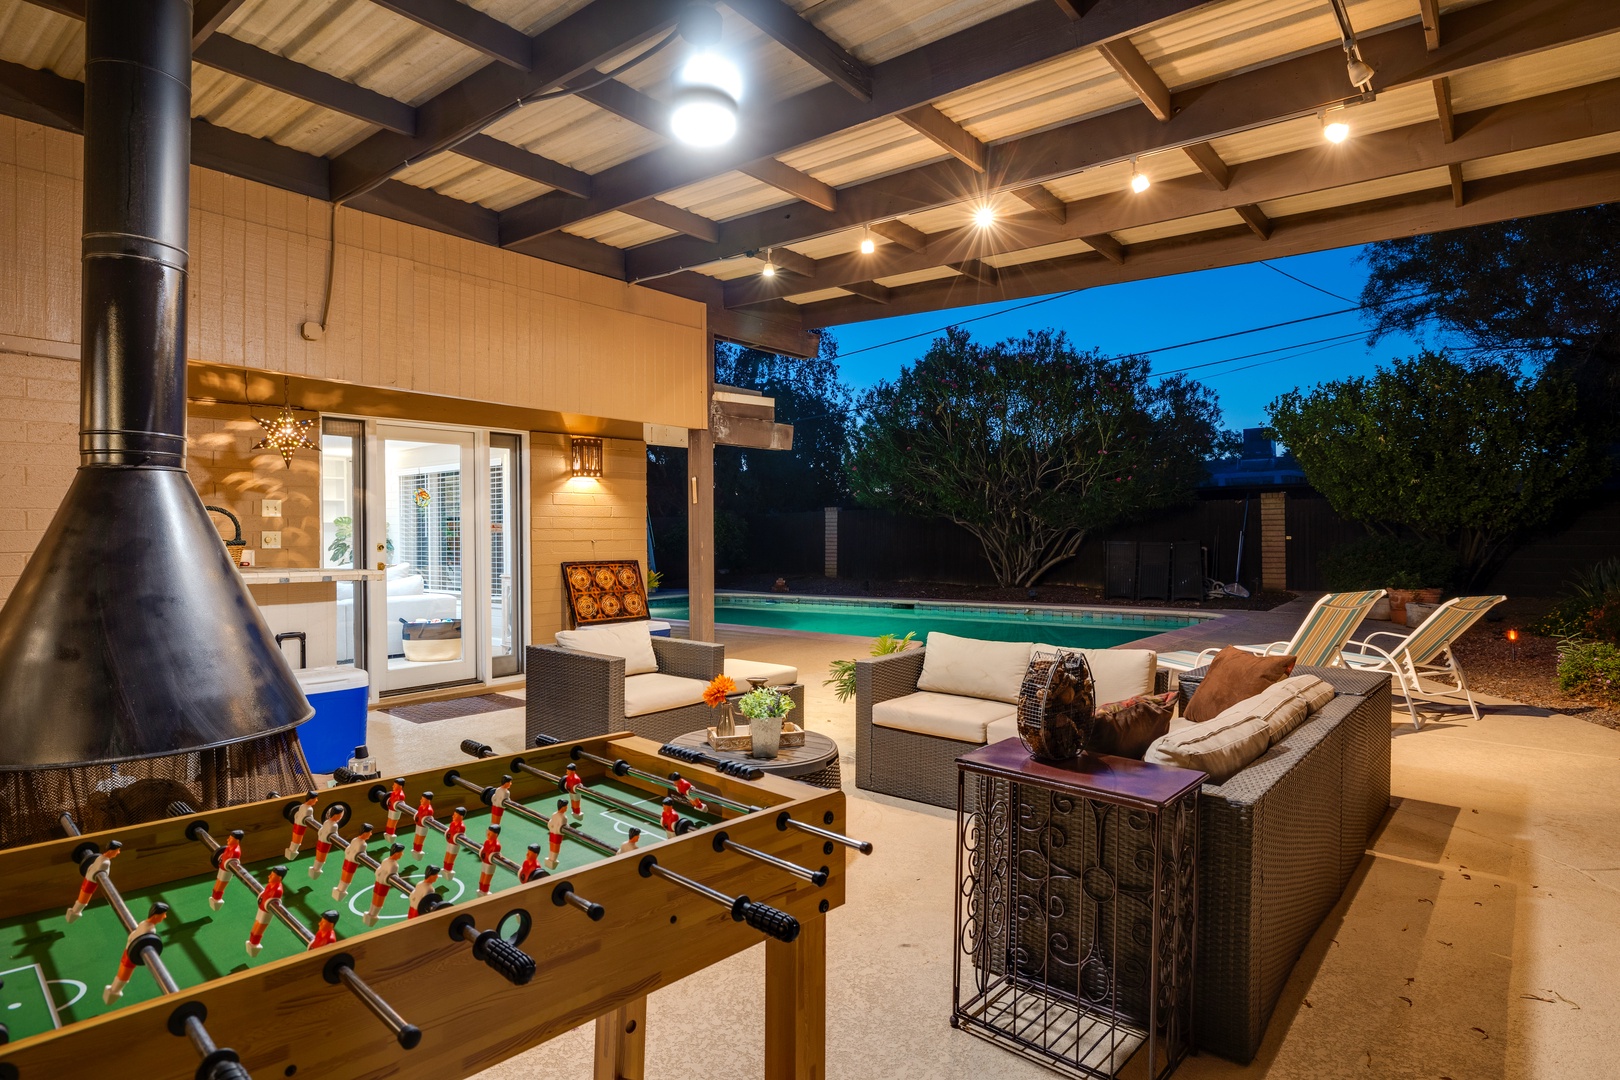 Foosball Table and outdoor lounge area